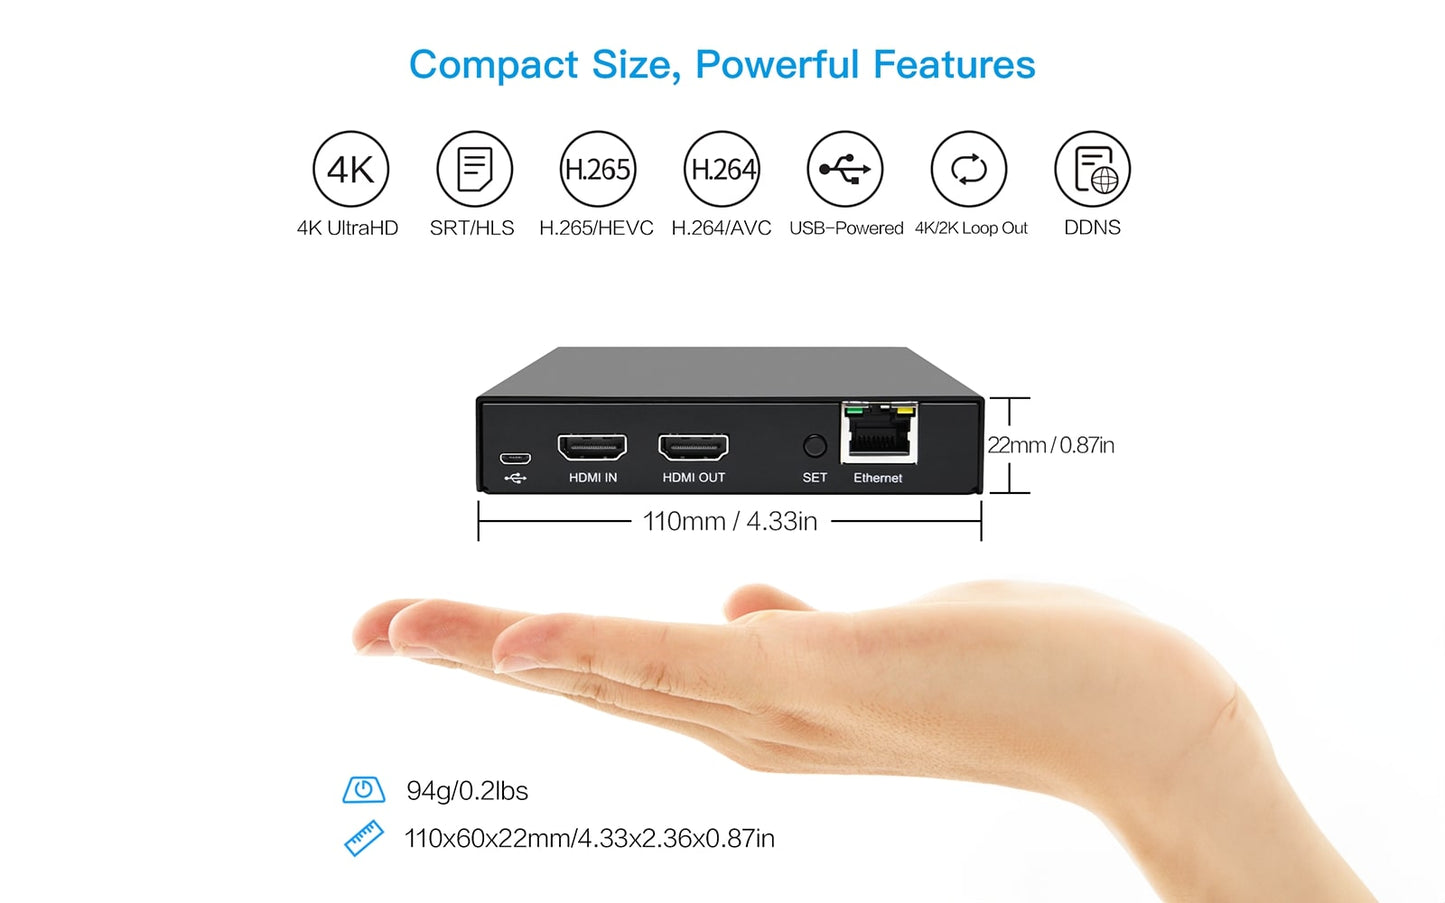 4K Local Loopout HDMI Video Encoder - Power Features - DDMALL